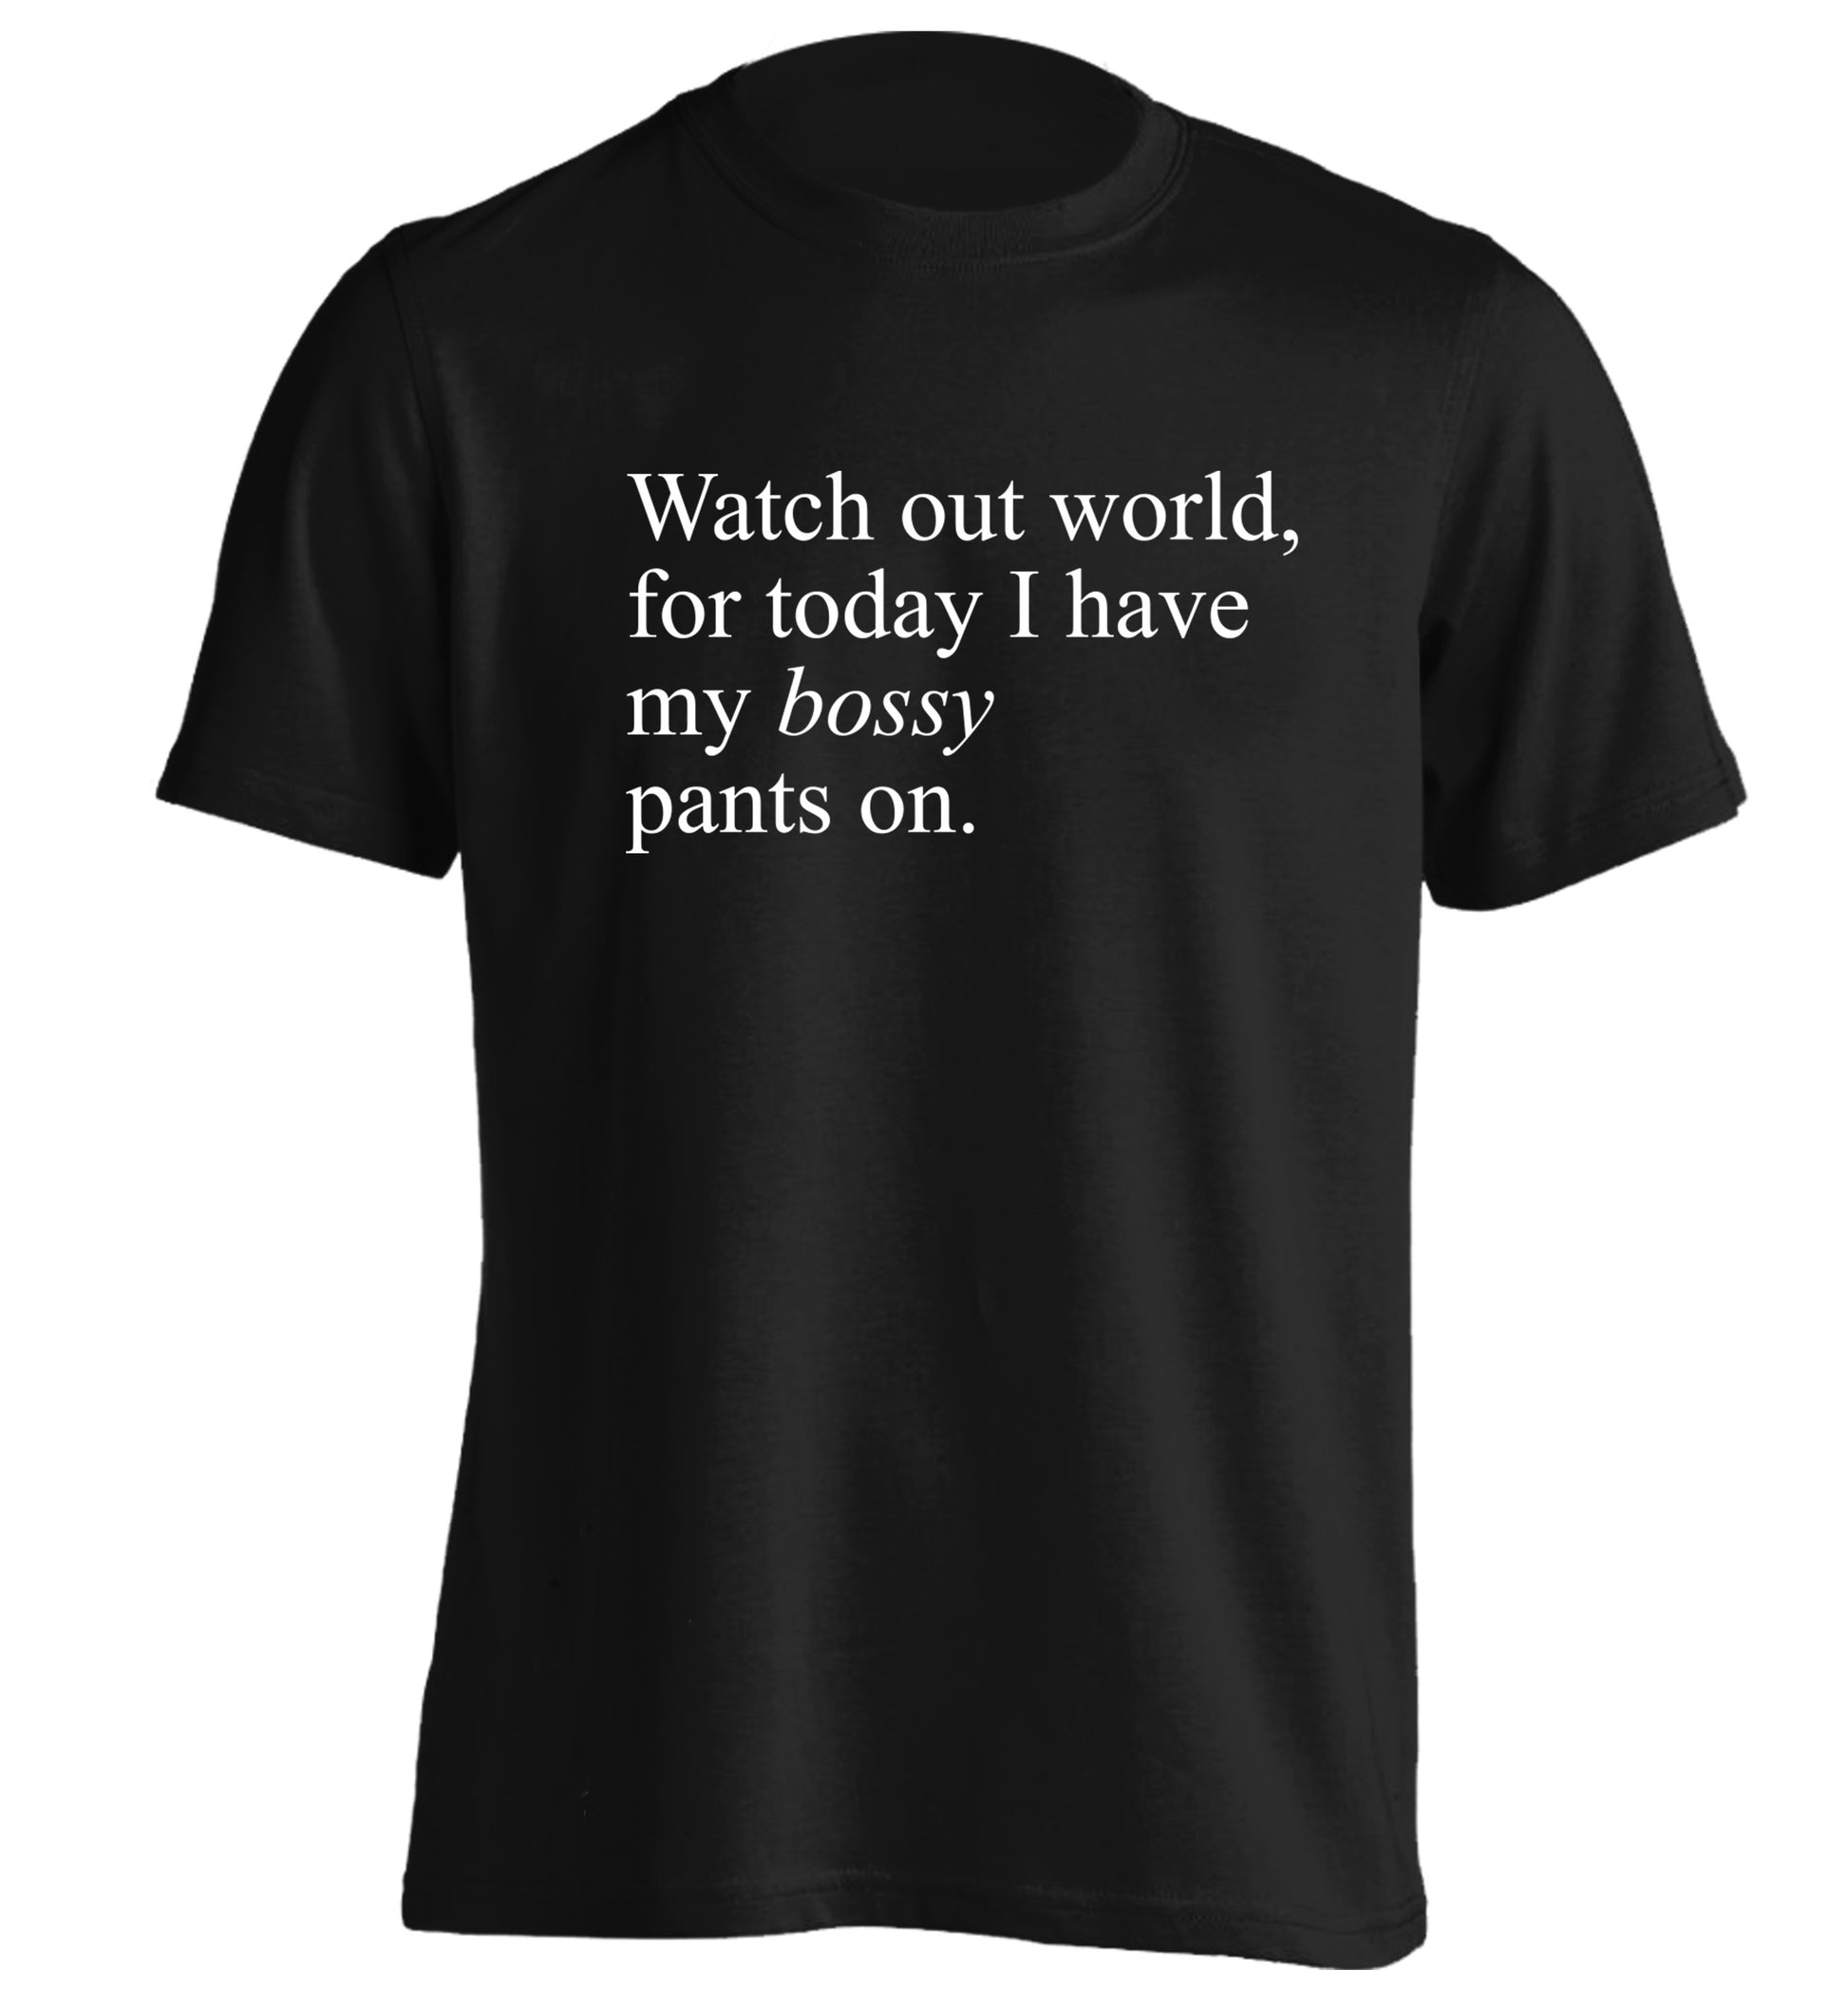 Watch out world, for today I have my bossy pants on adults unisex black Tshirt 2XL